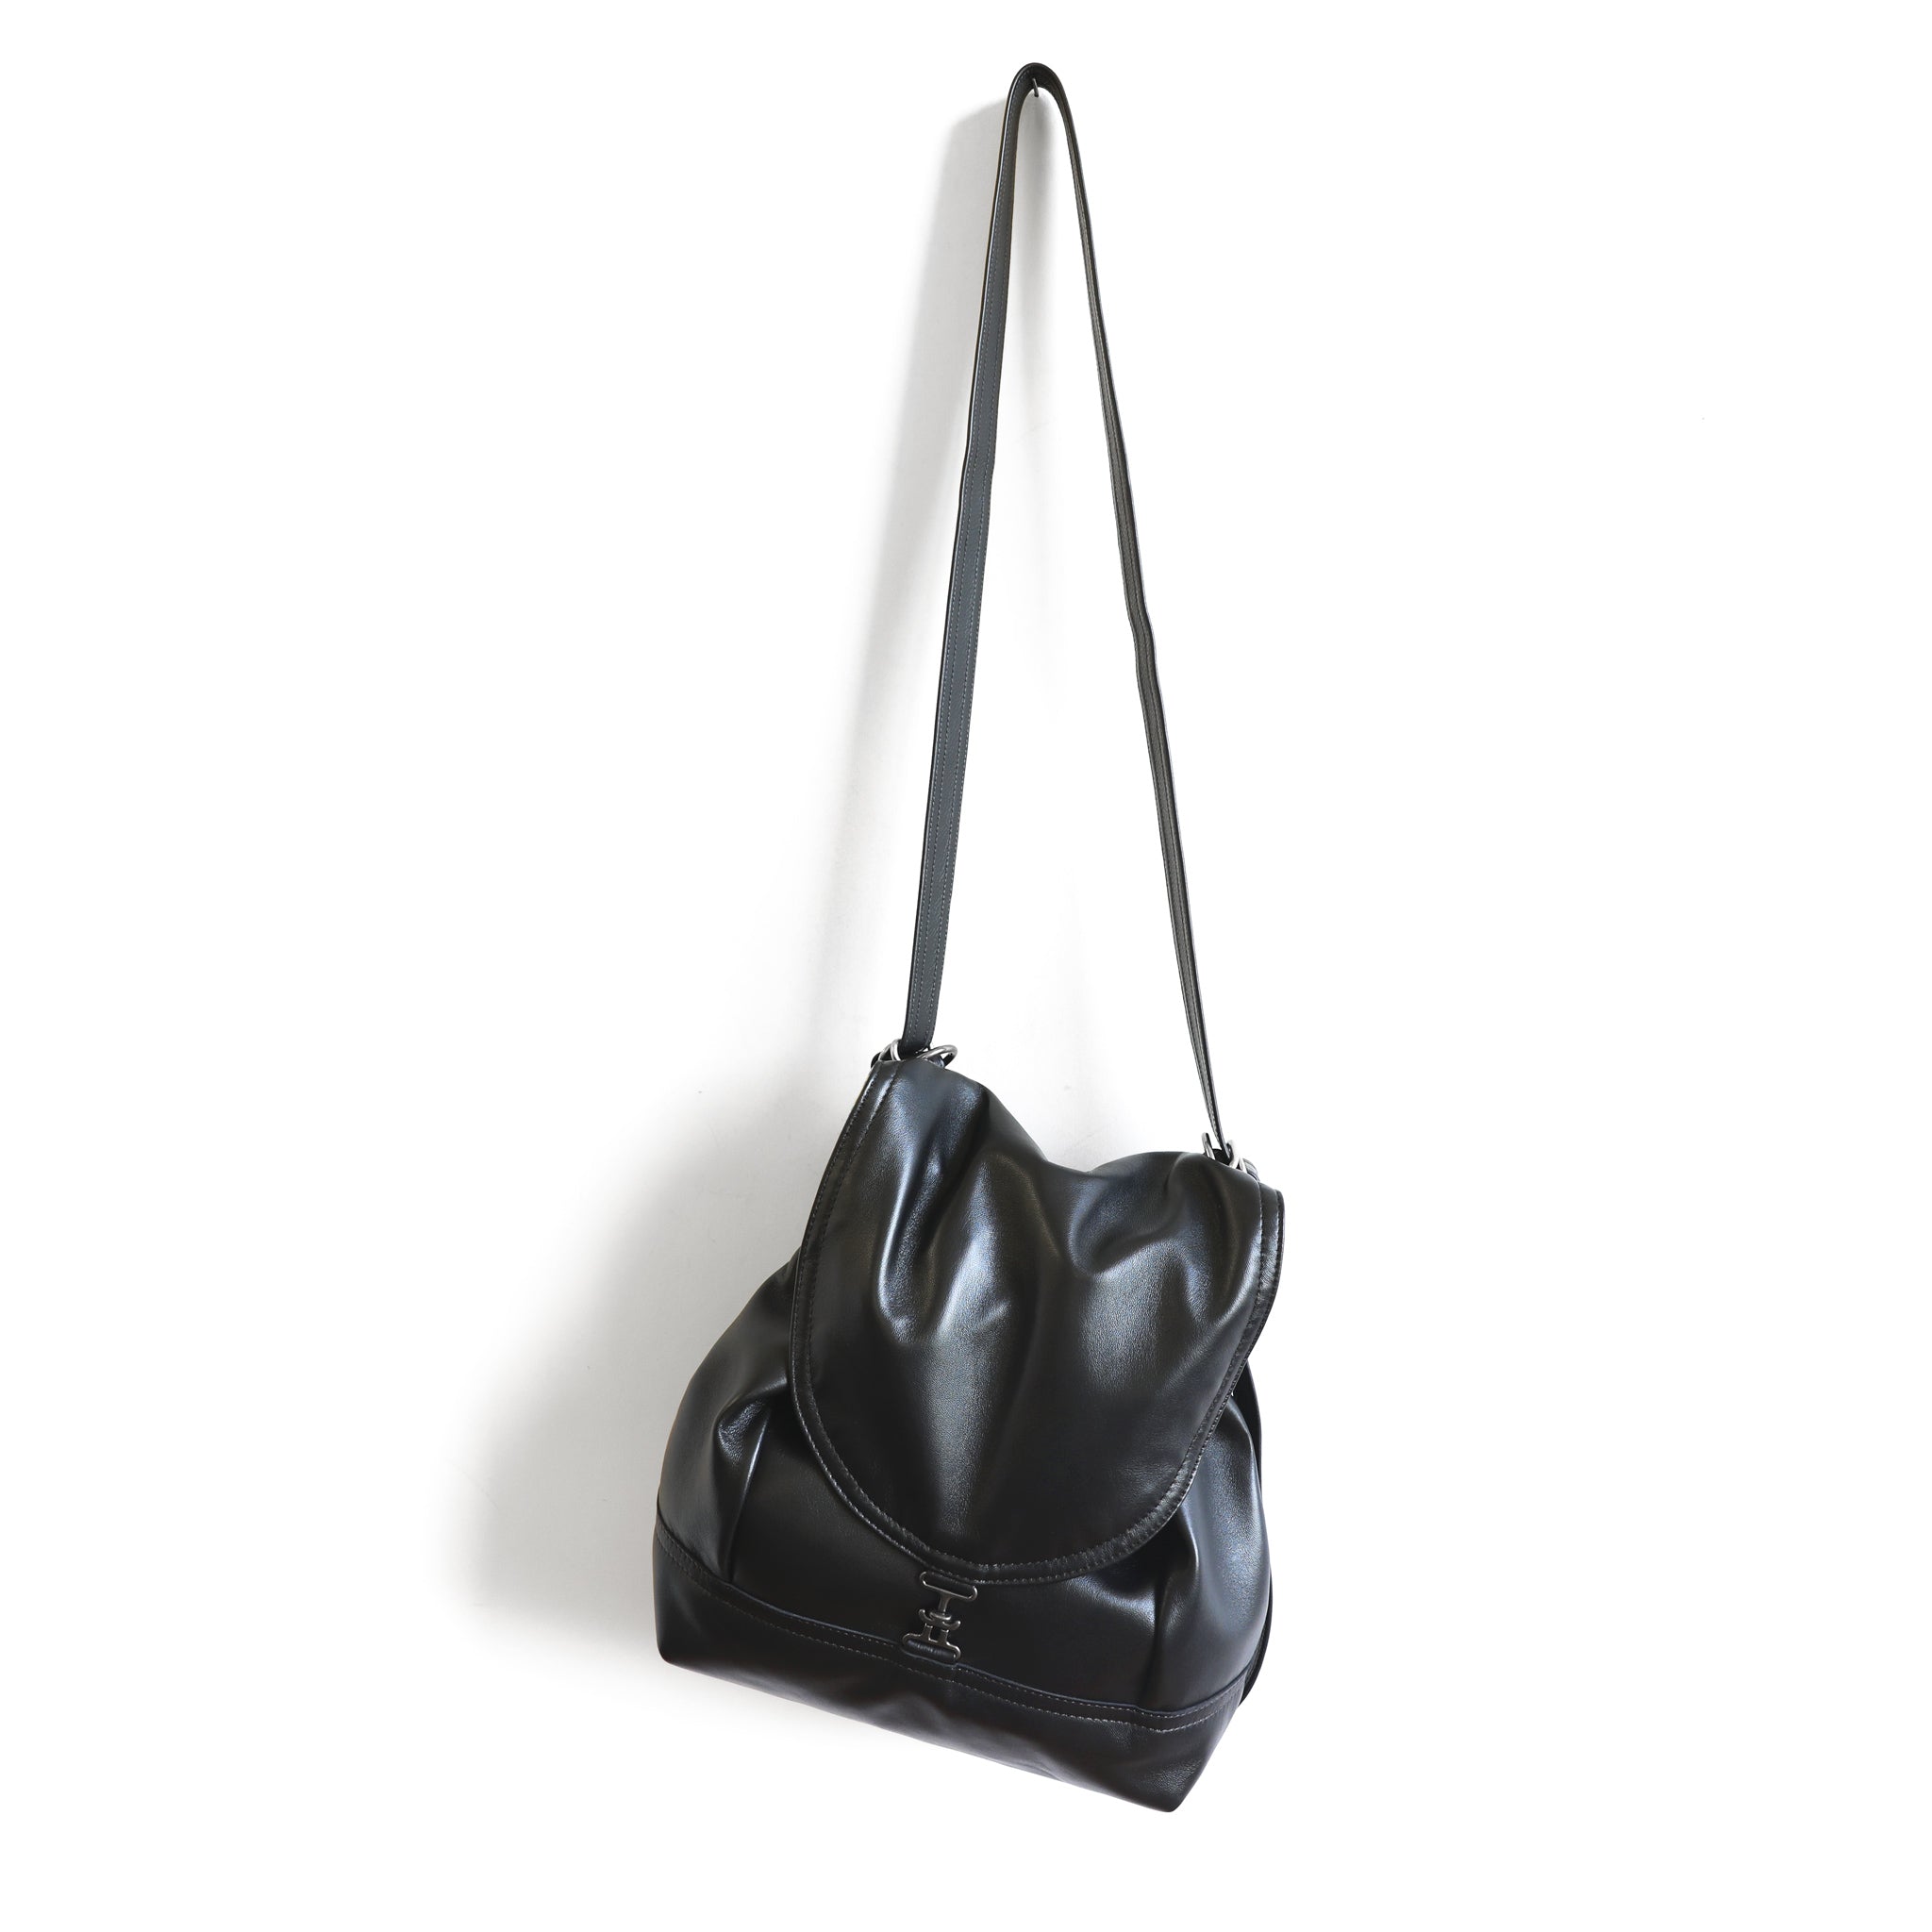 1904 maxwell size large in plonge black low-profile strap adjusted to cross-body length